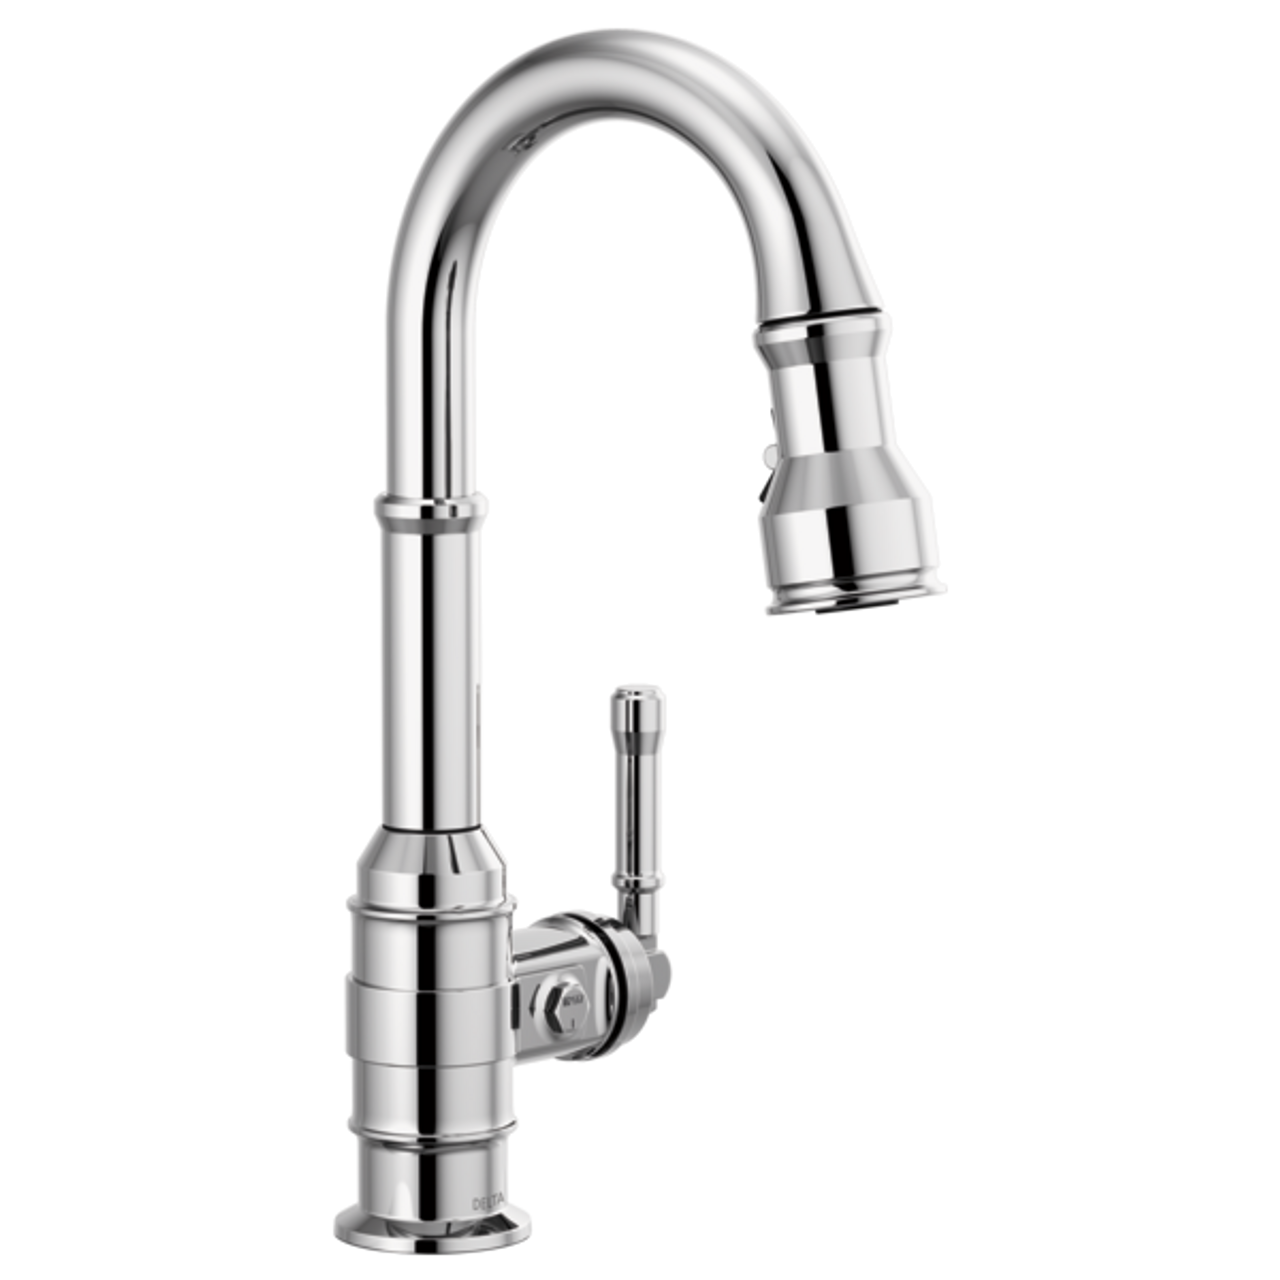 Delta Cassidy Kitchen Faucet With Side Spray Includes Lifetime Warranty S Royal Bath Place